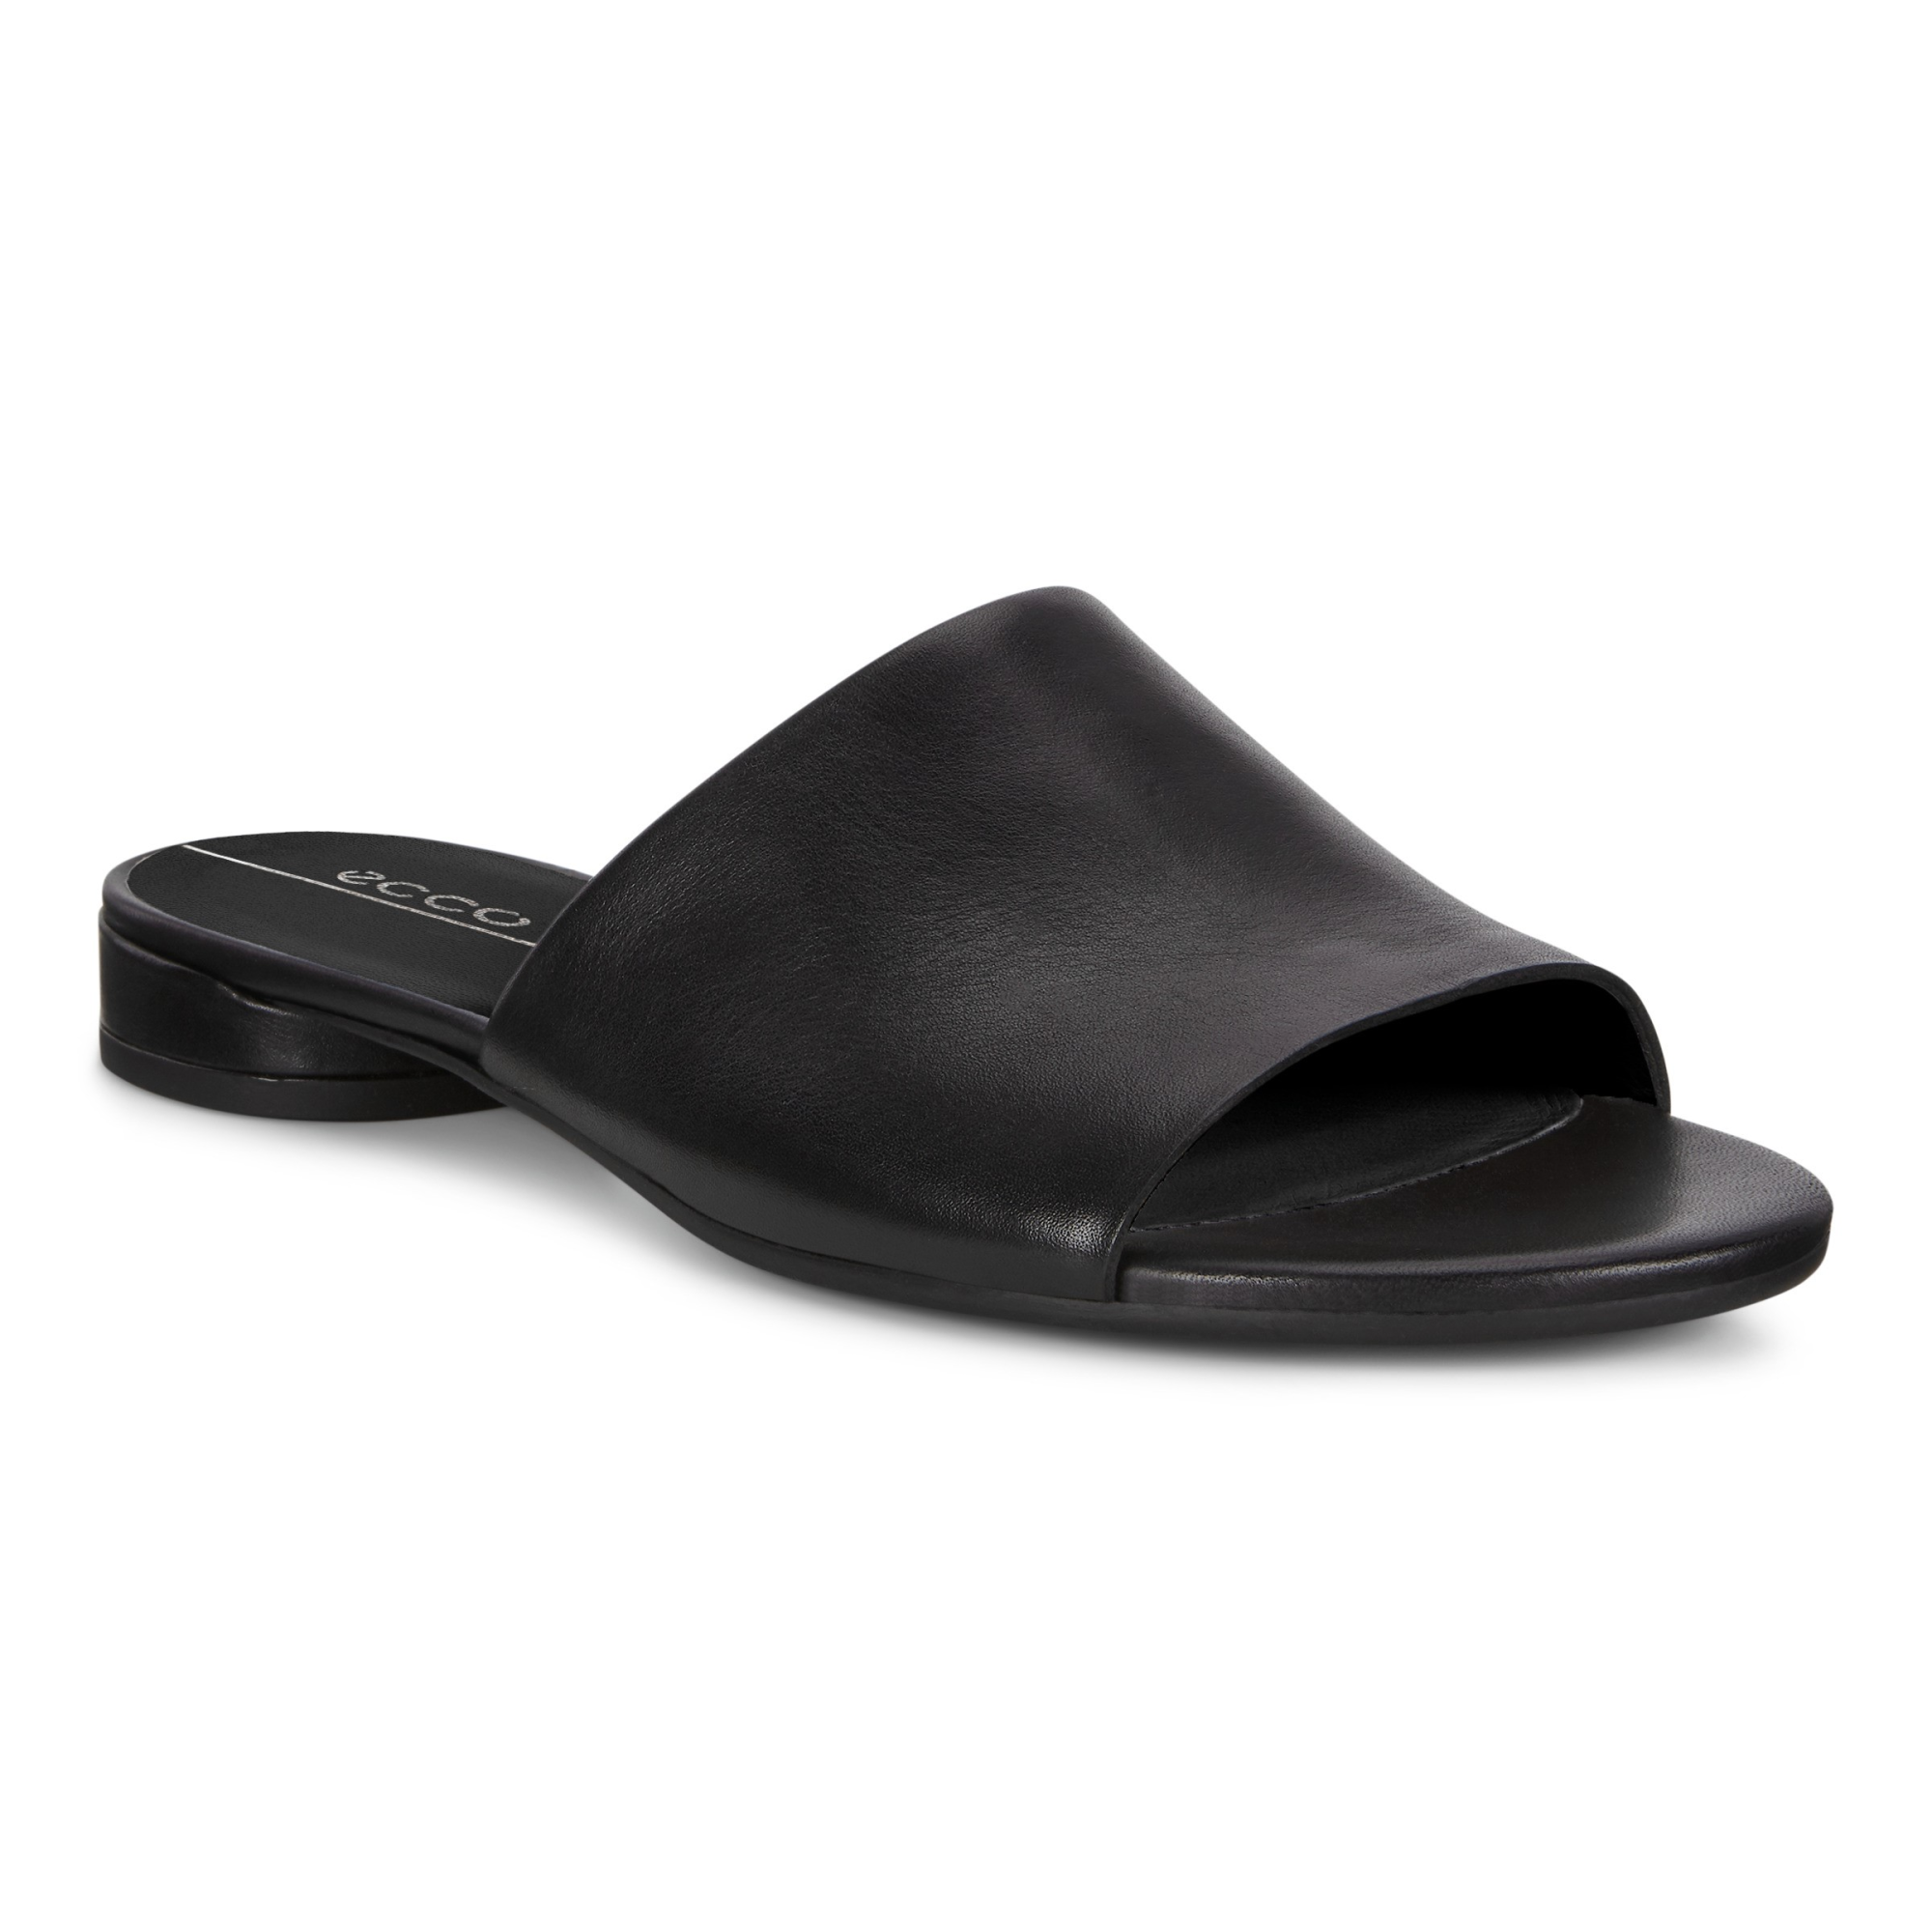 Ledig søsyge Splendor Ecco W FLAT SANDAL II 36 - Products - Veryk Mall - Veryk Mall, many  product, quick response, safe your money!